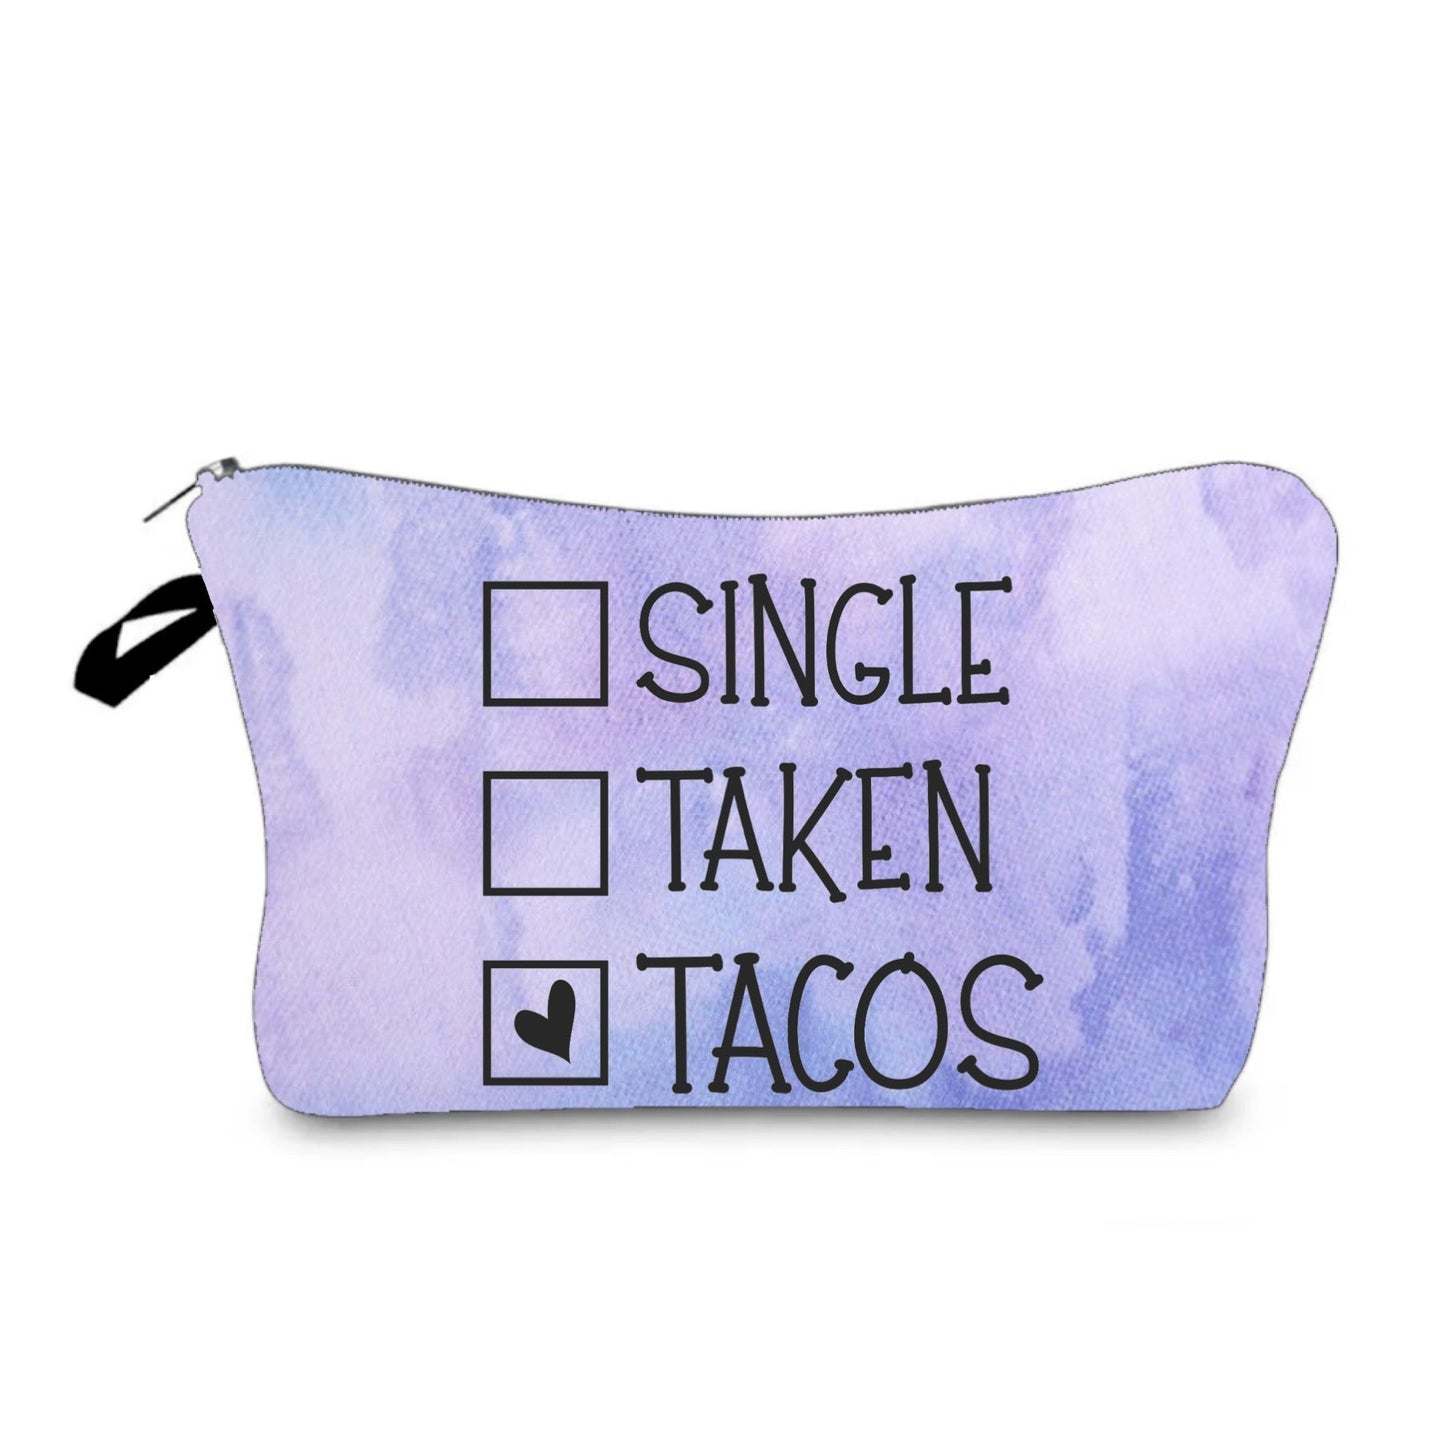 Single Taken Tacos - Water-Resistant Multi-Use Pouch